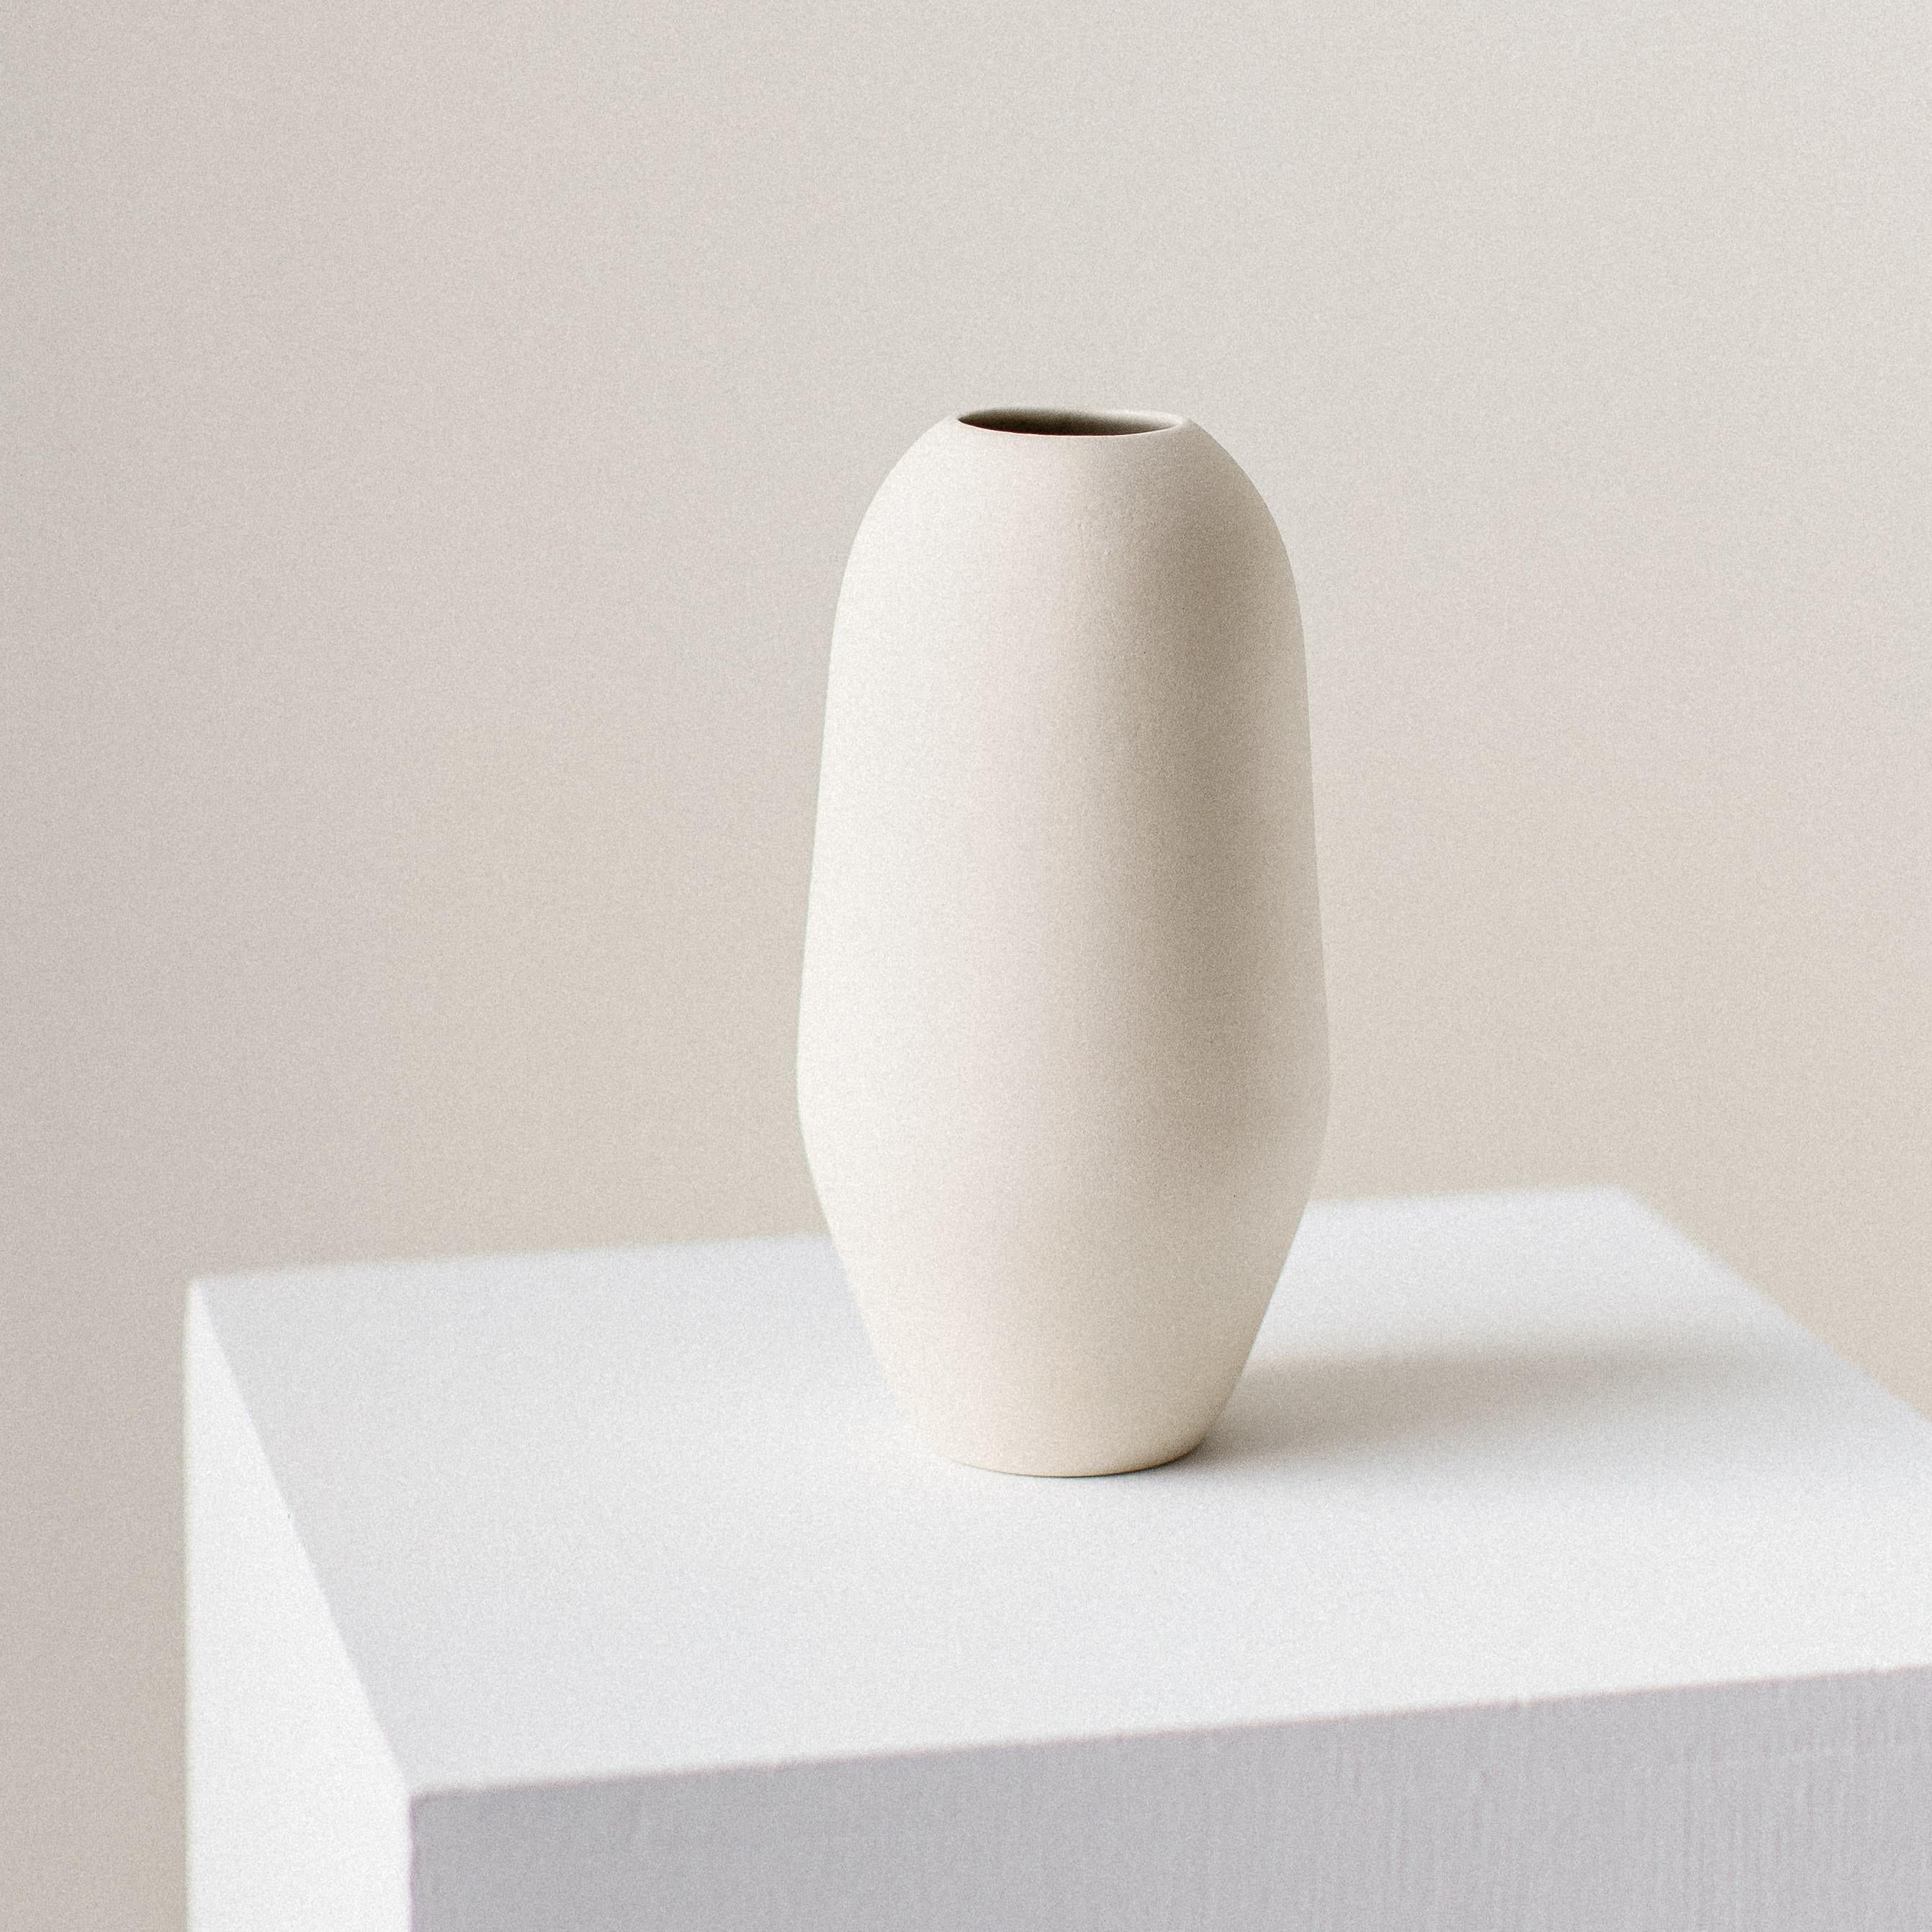 Unique heir vessel by Dust and Form
Dimensions: D 8.8 x 17 H cm
Materials: Porcelain

Origin Form Collection in three finishes: hand-sanded (our Classic, smooth, bare finish) Ivory (satin white glaze) Charcoal (matte black glaze). Please contact